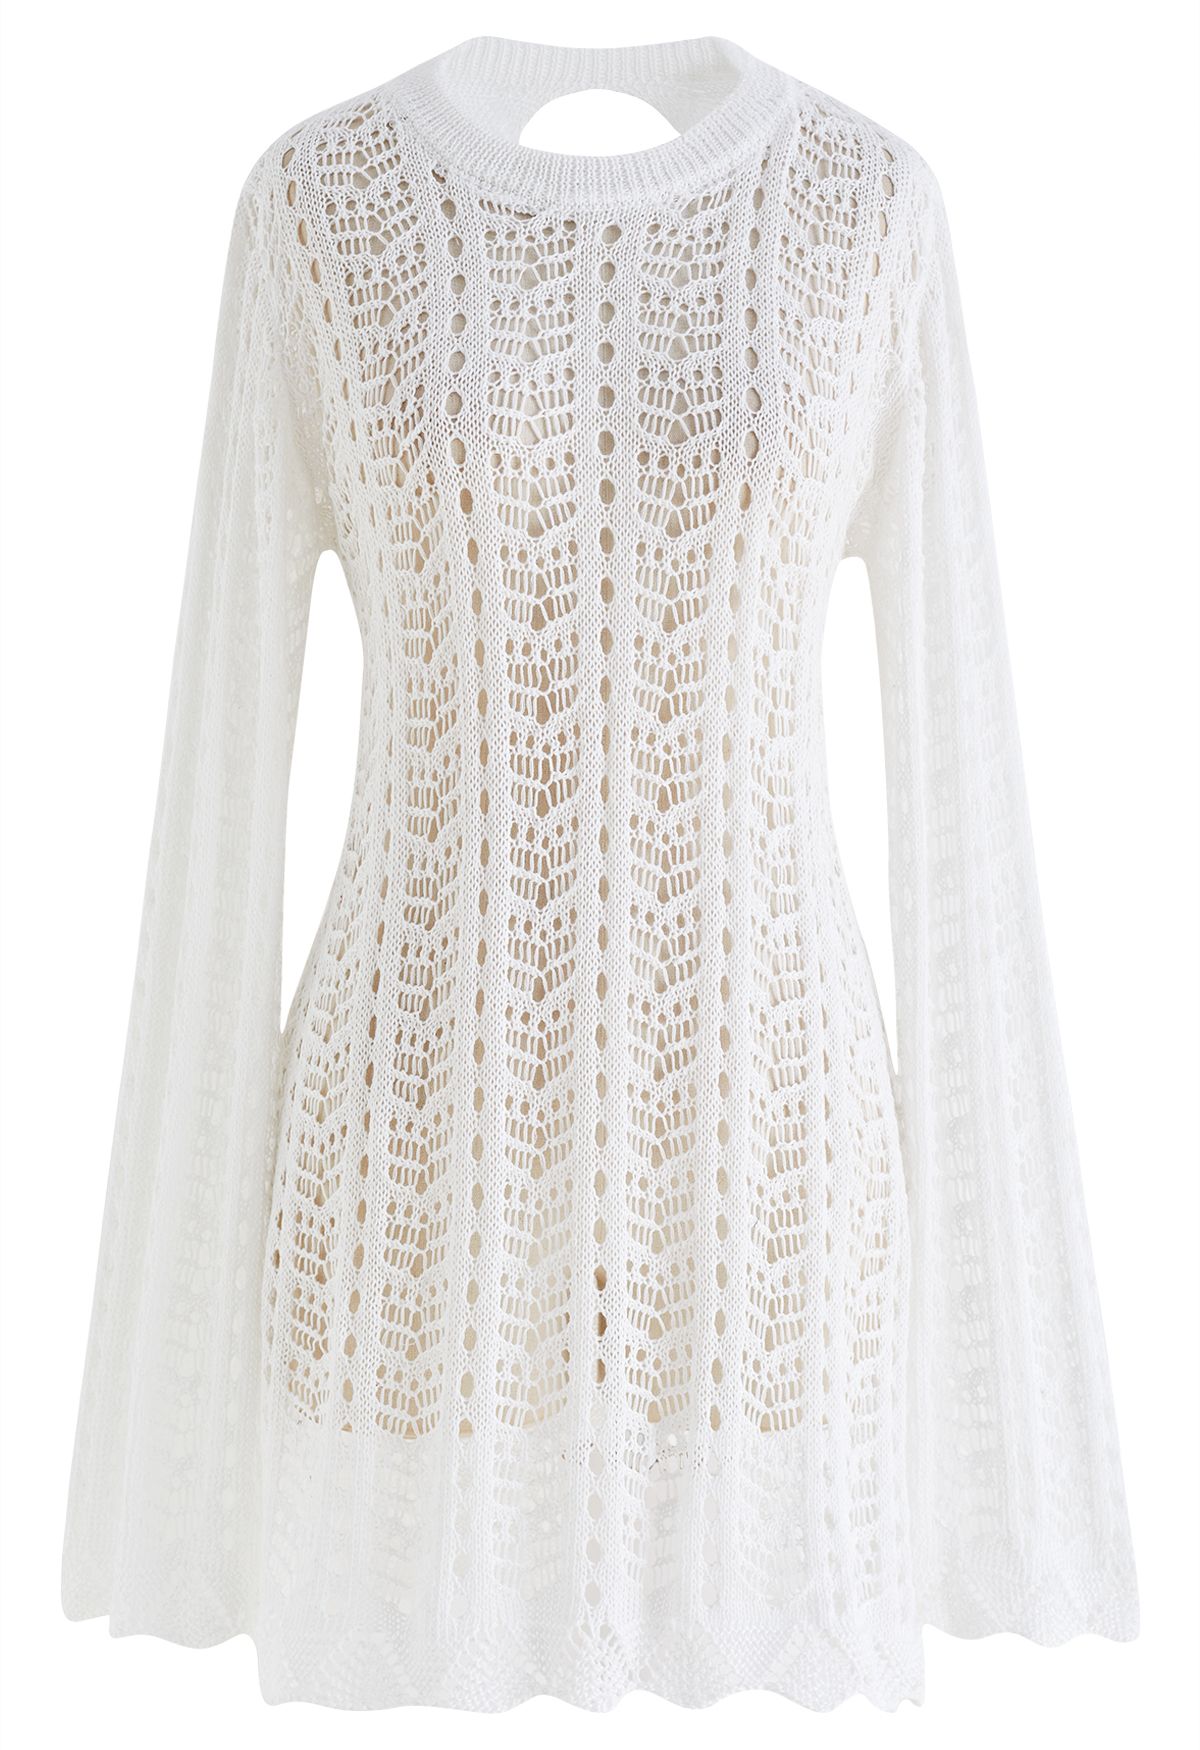 Open Back Hollow Out Knit Cover Up in White - Retro, Indie and Unique ...